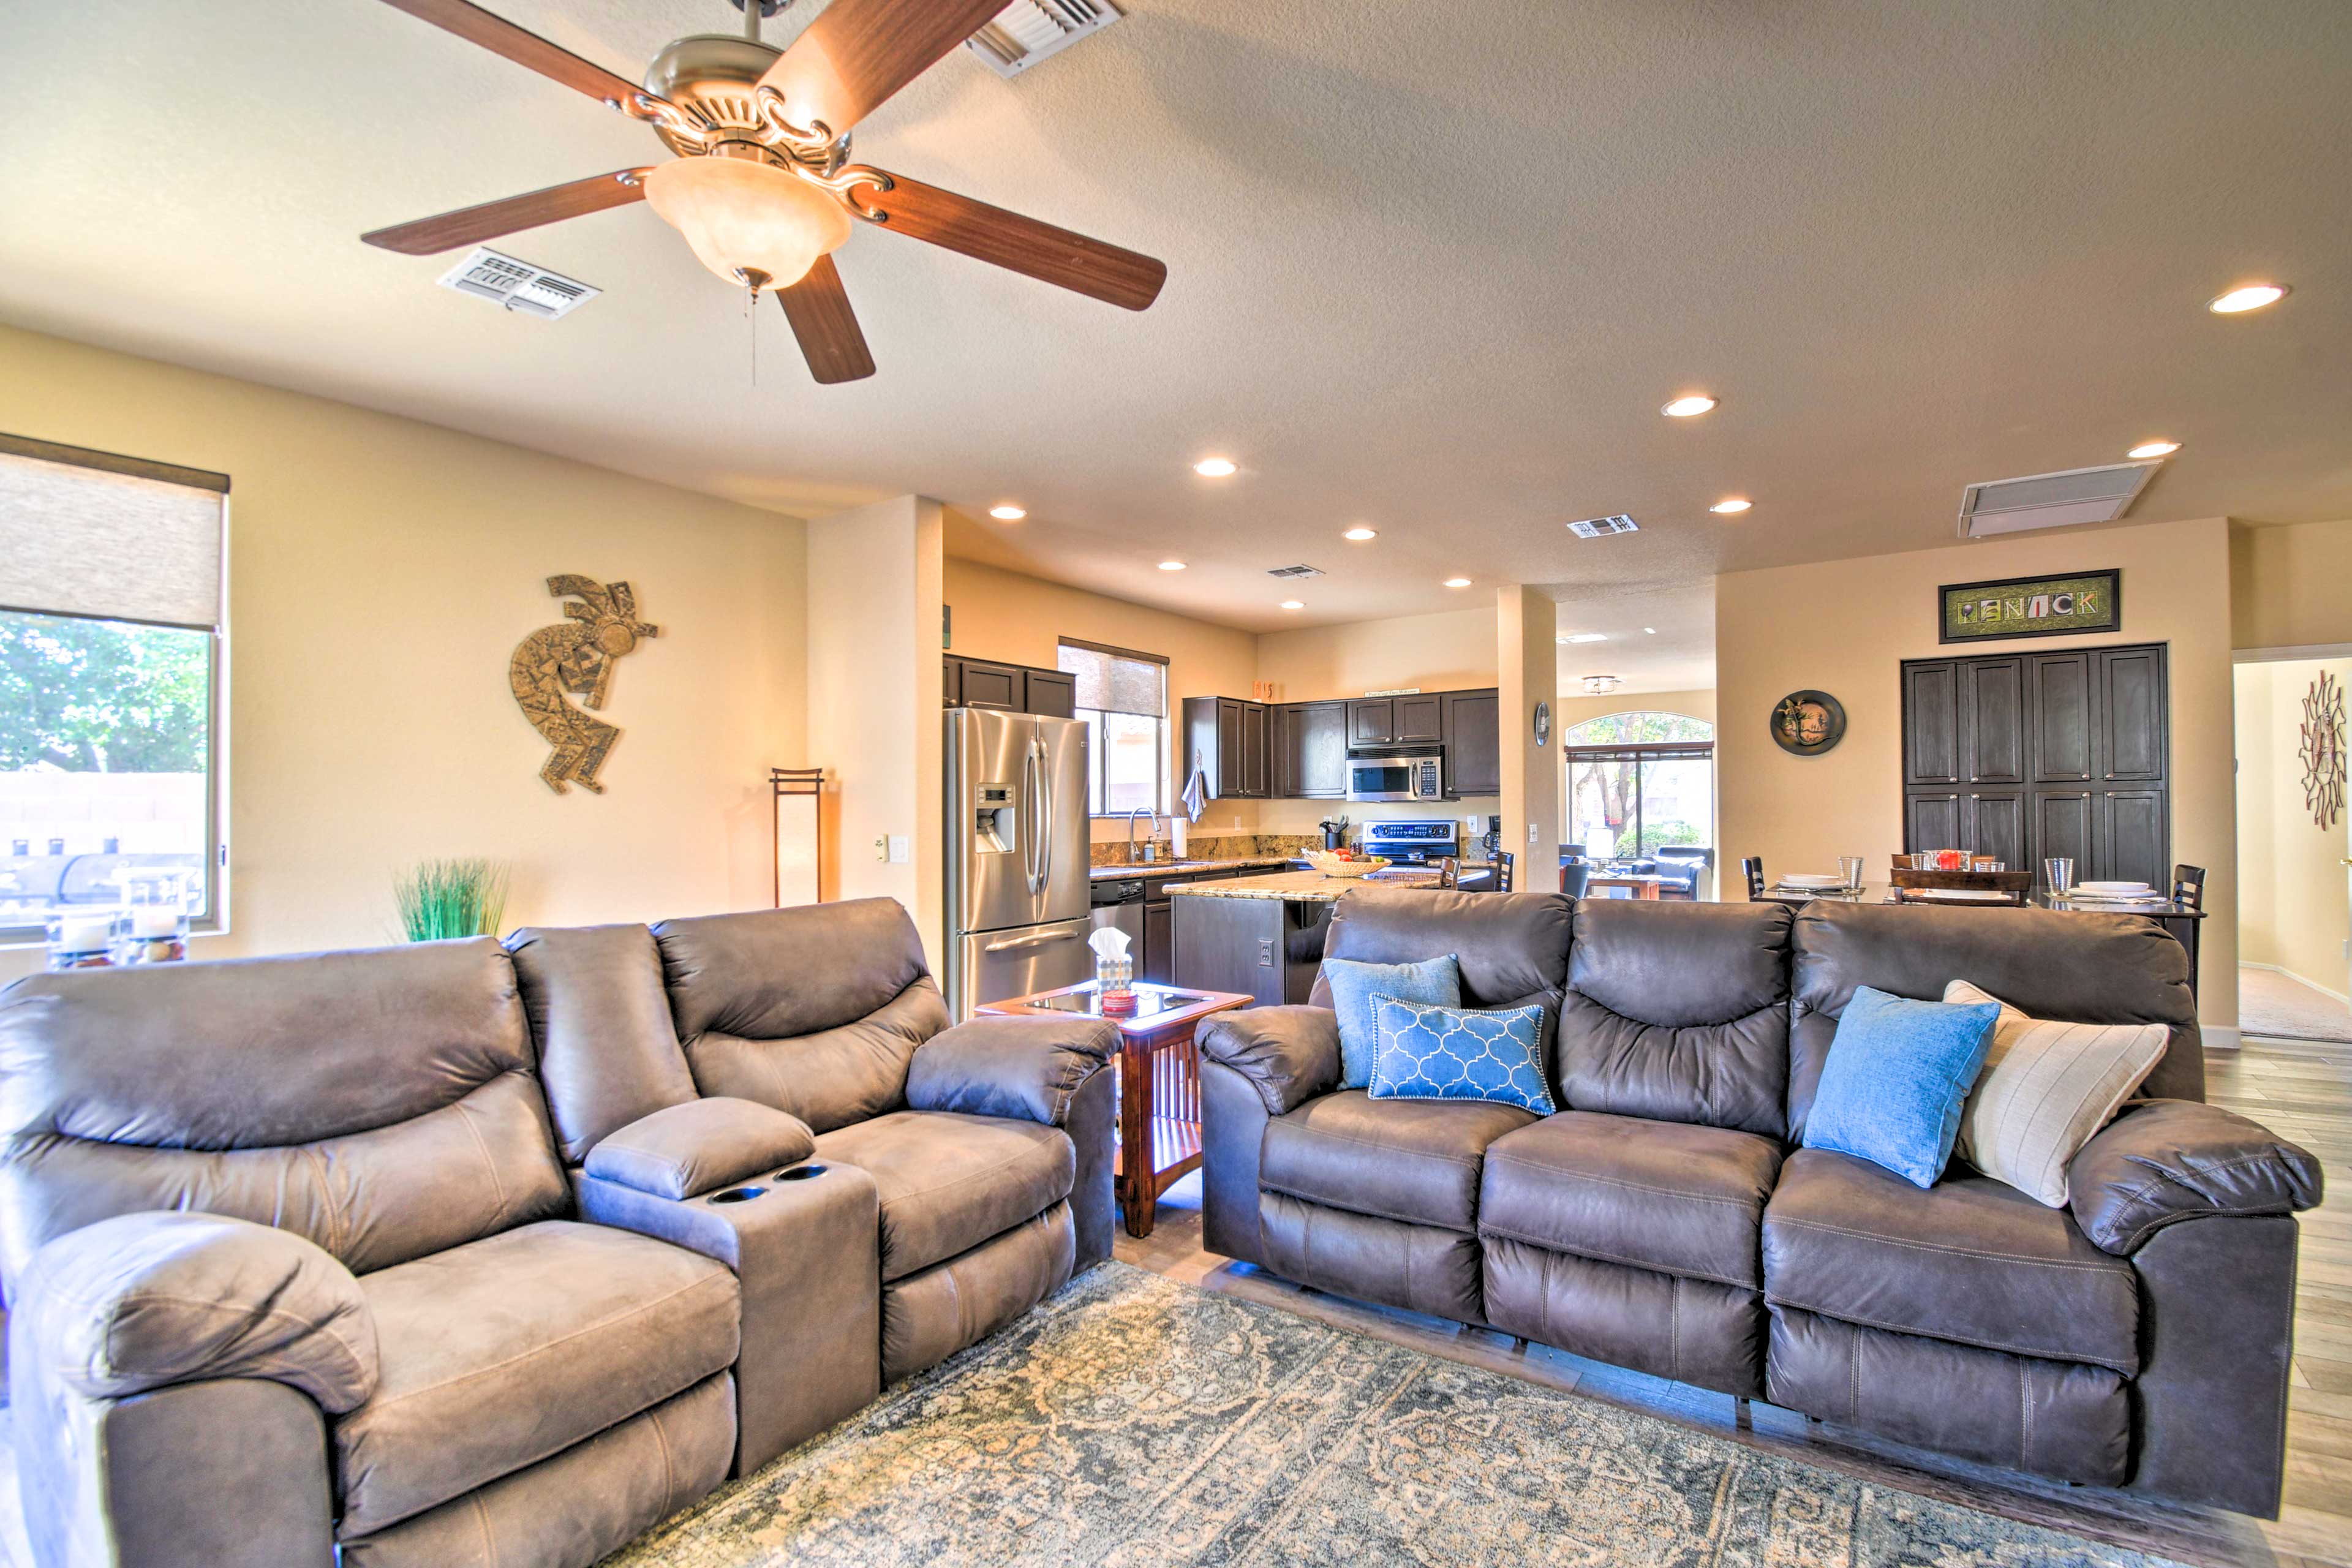 Living Room | Recliner Sofas | Central Air Conditioning